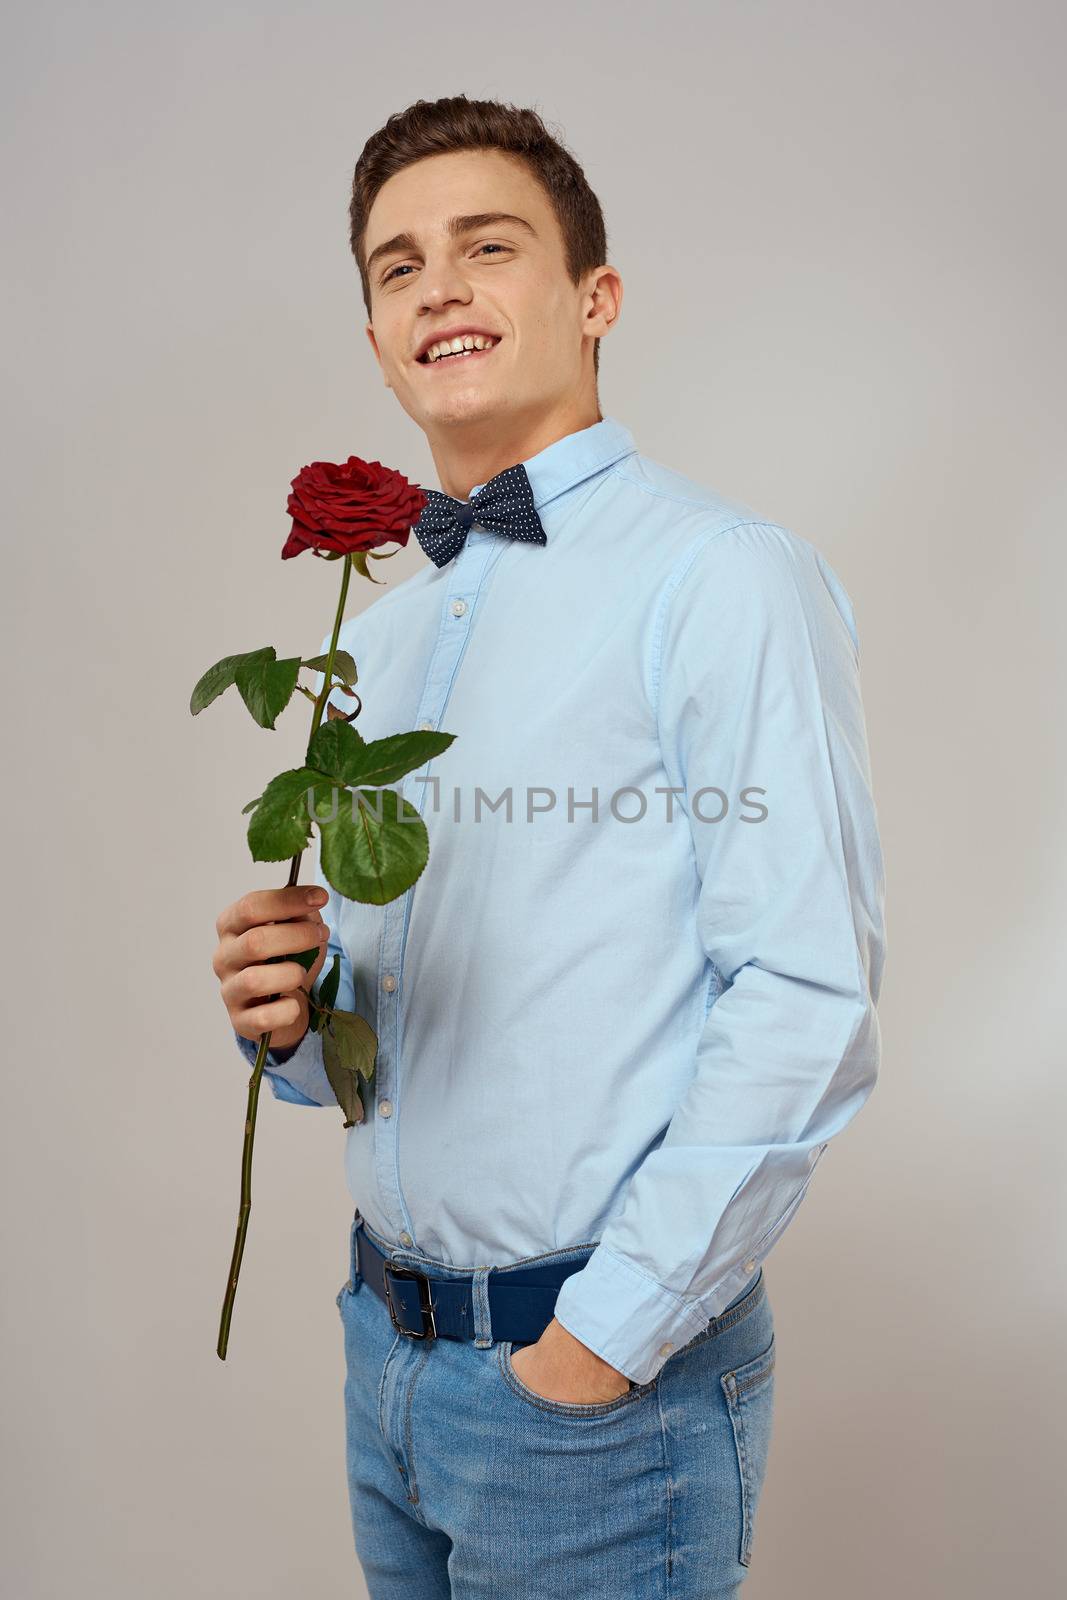 romantic man with red rose and light shirt pants suit by SHOTPRIME